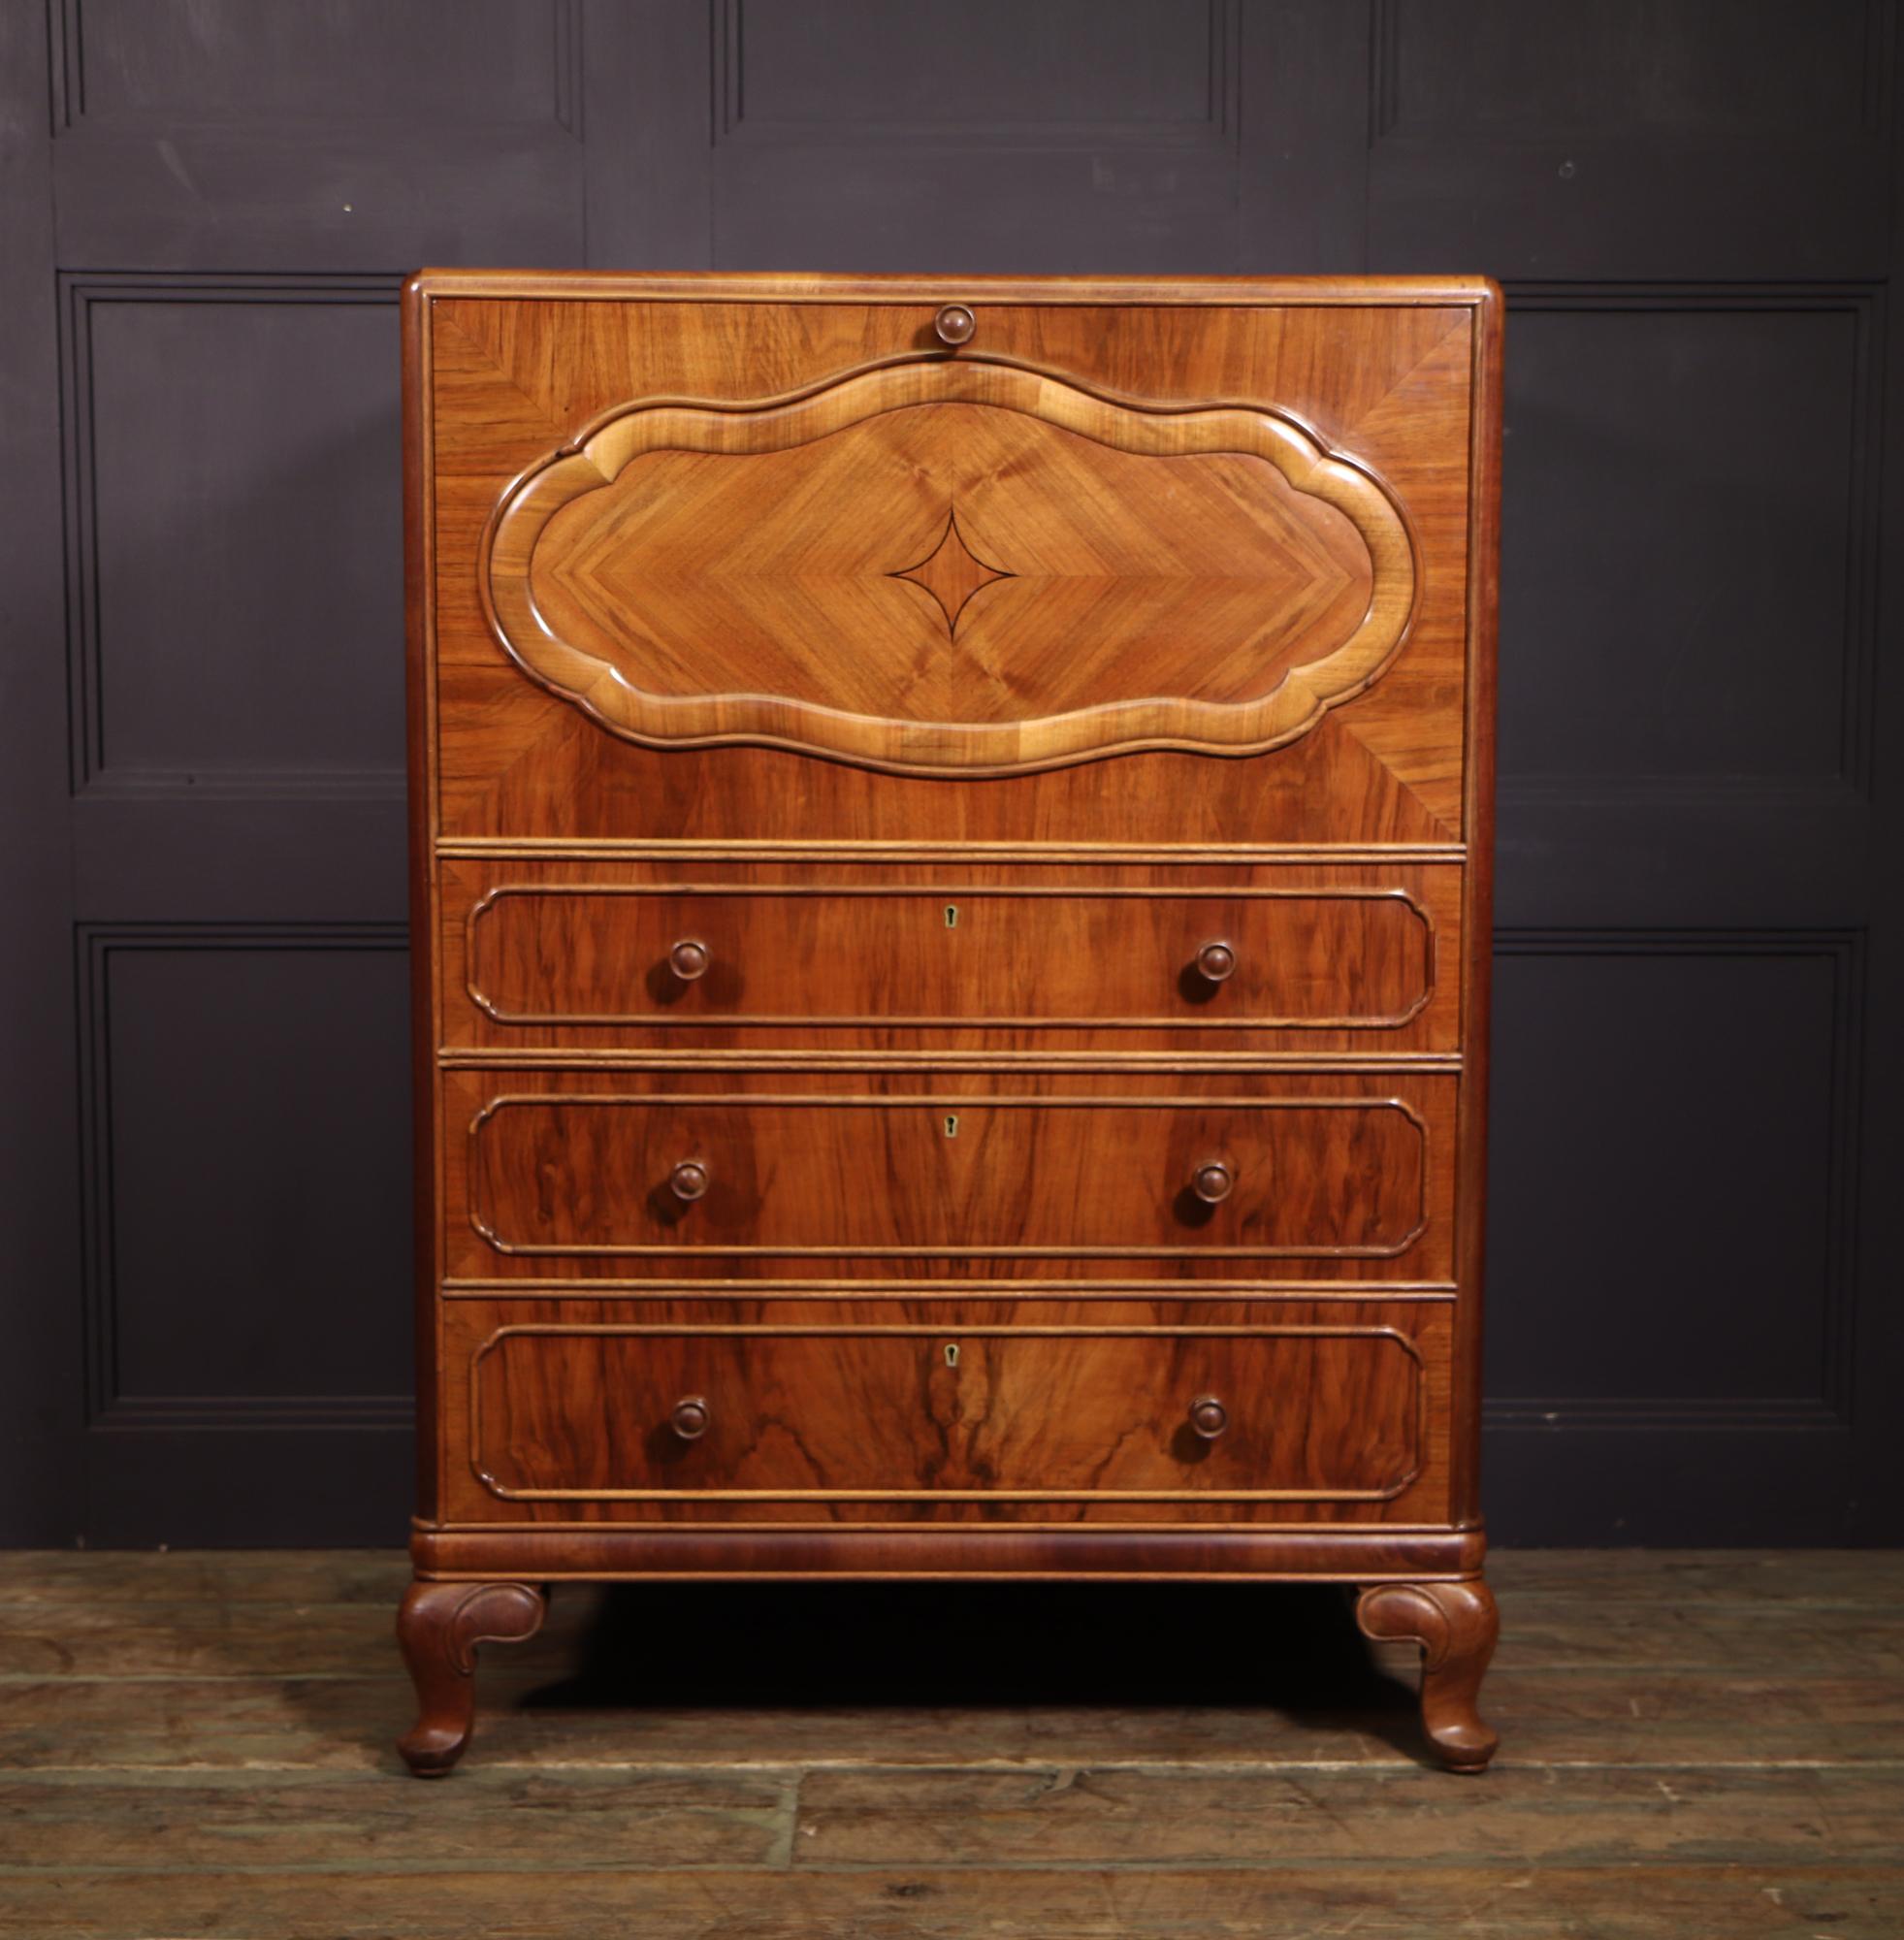 Scottish Butlers Linen Chest by Wylie and Lochhead